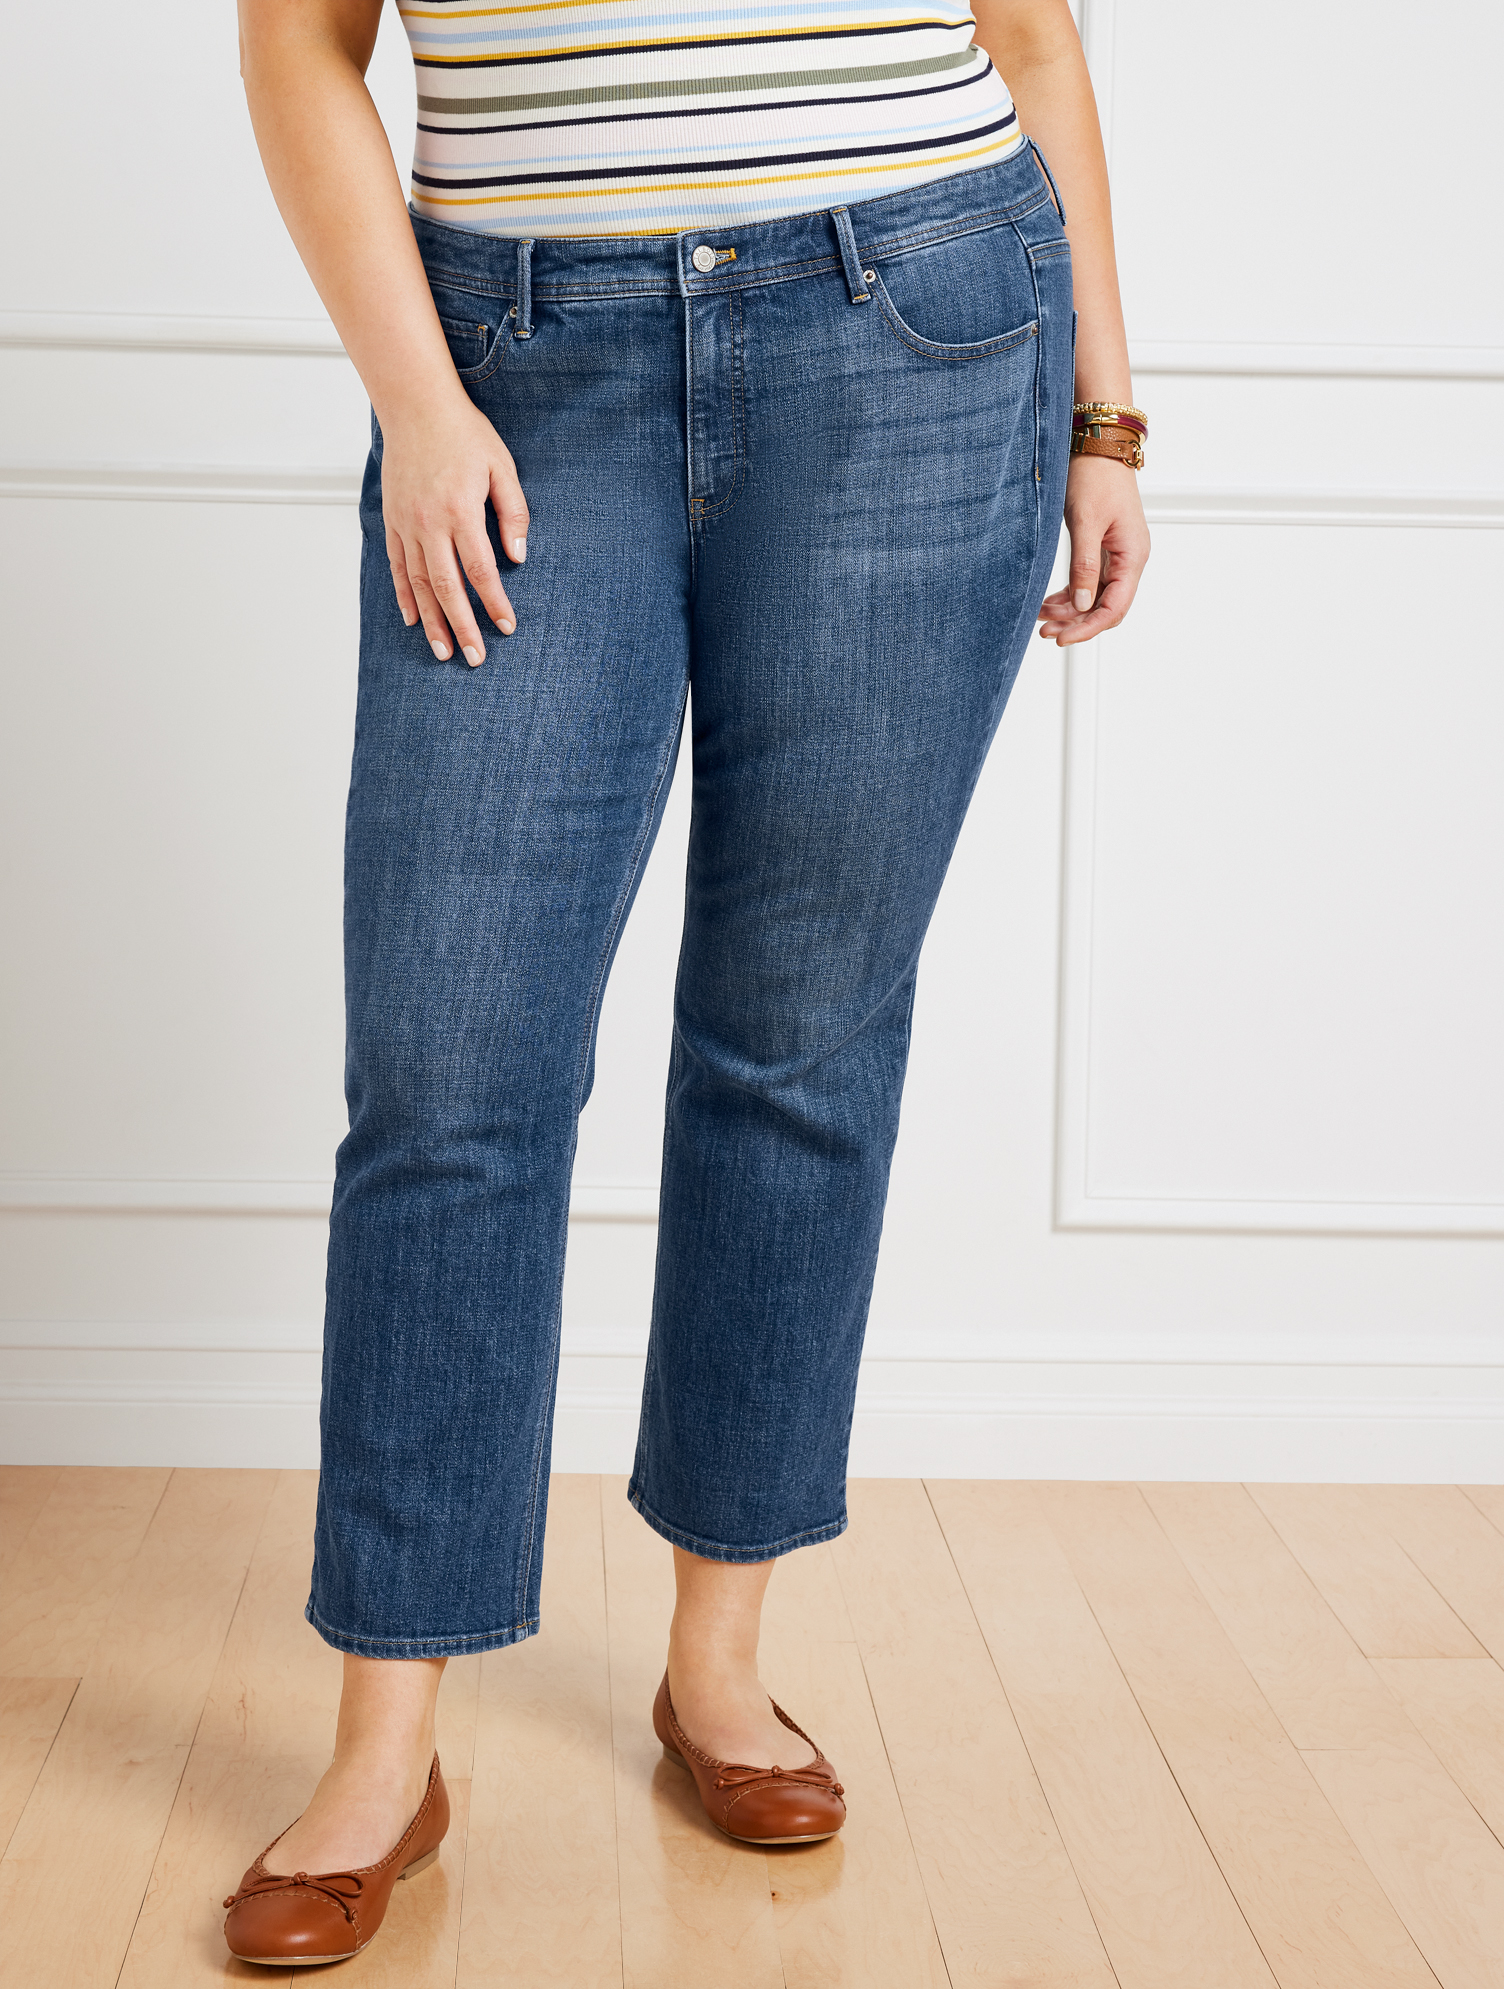 Talbots Demi Boot Crop Ankle Jeans - Maria Wash - 16